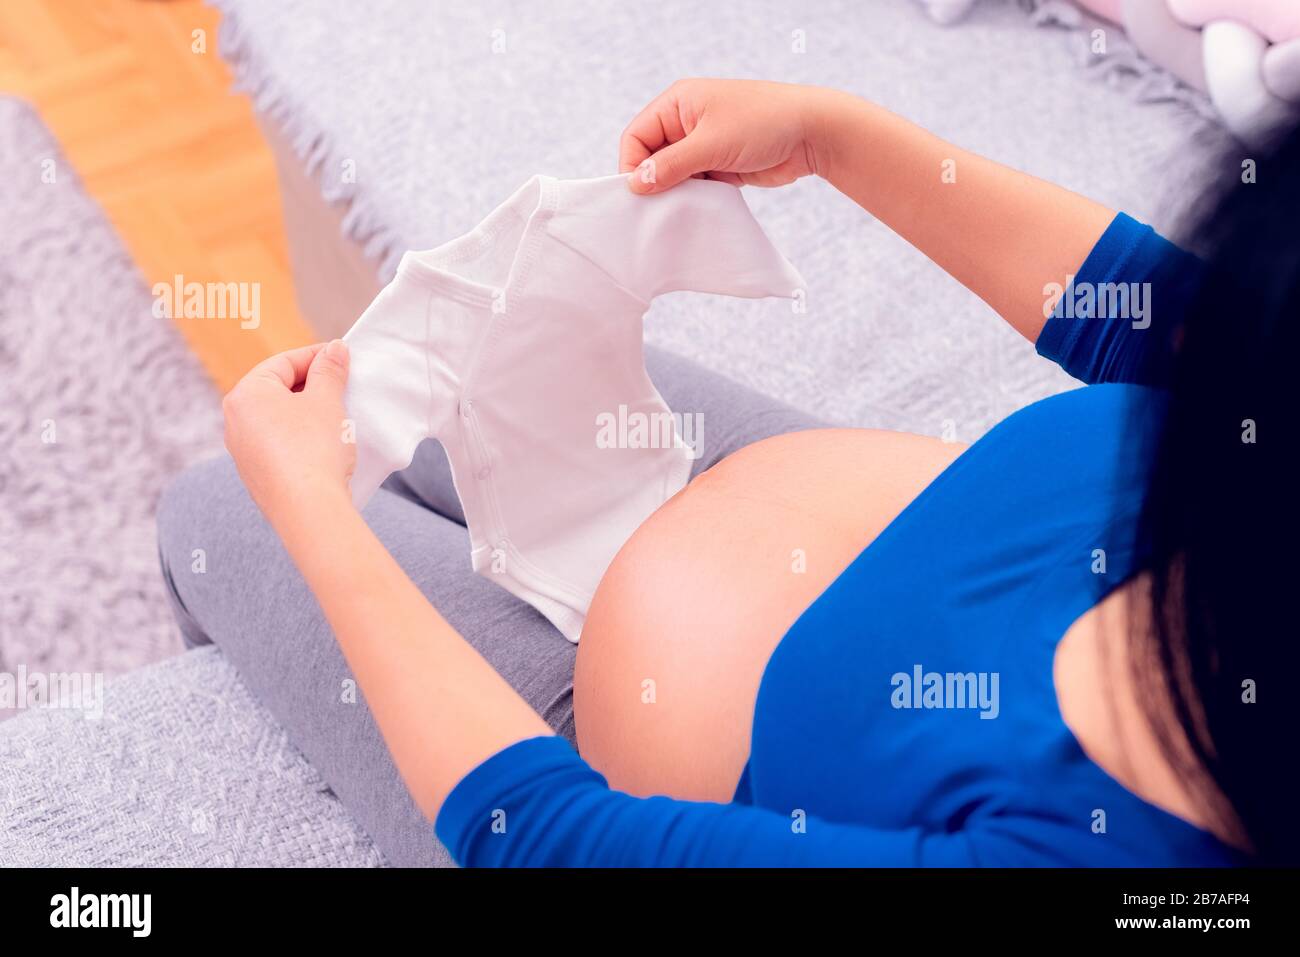 Pregnant woman holding baby body clothes on her large belly. Stock Photo